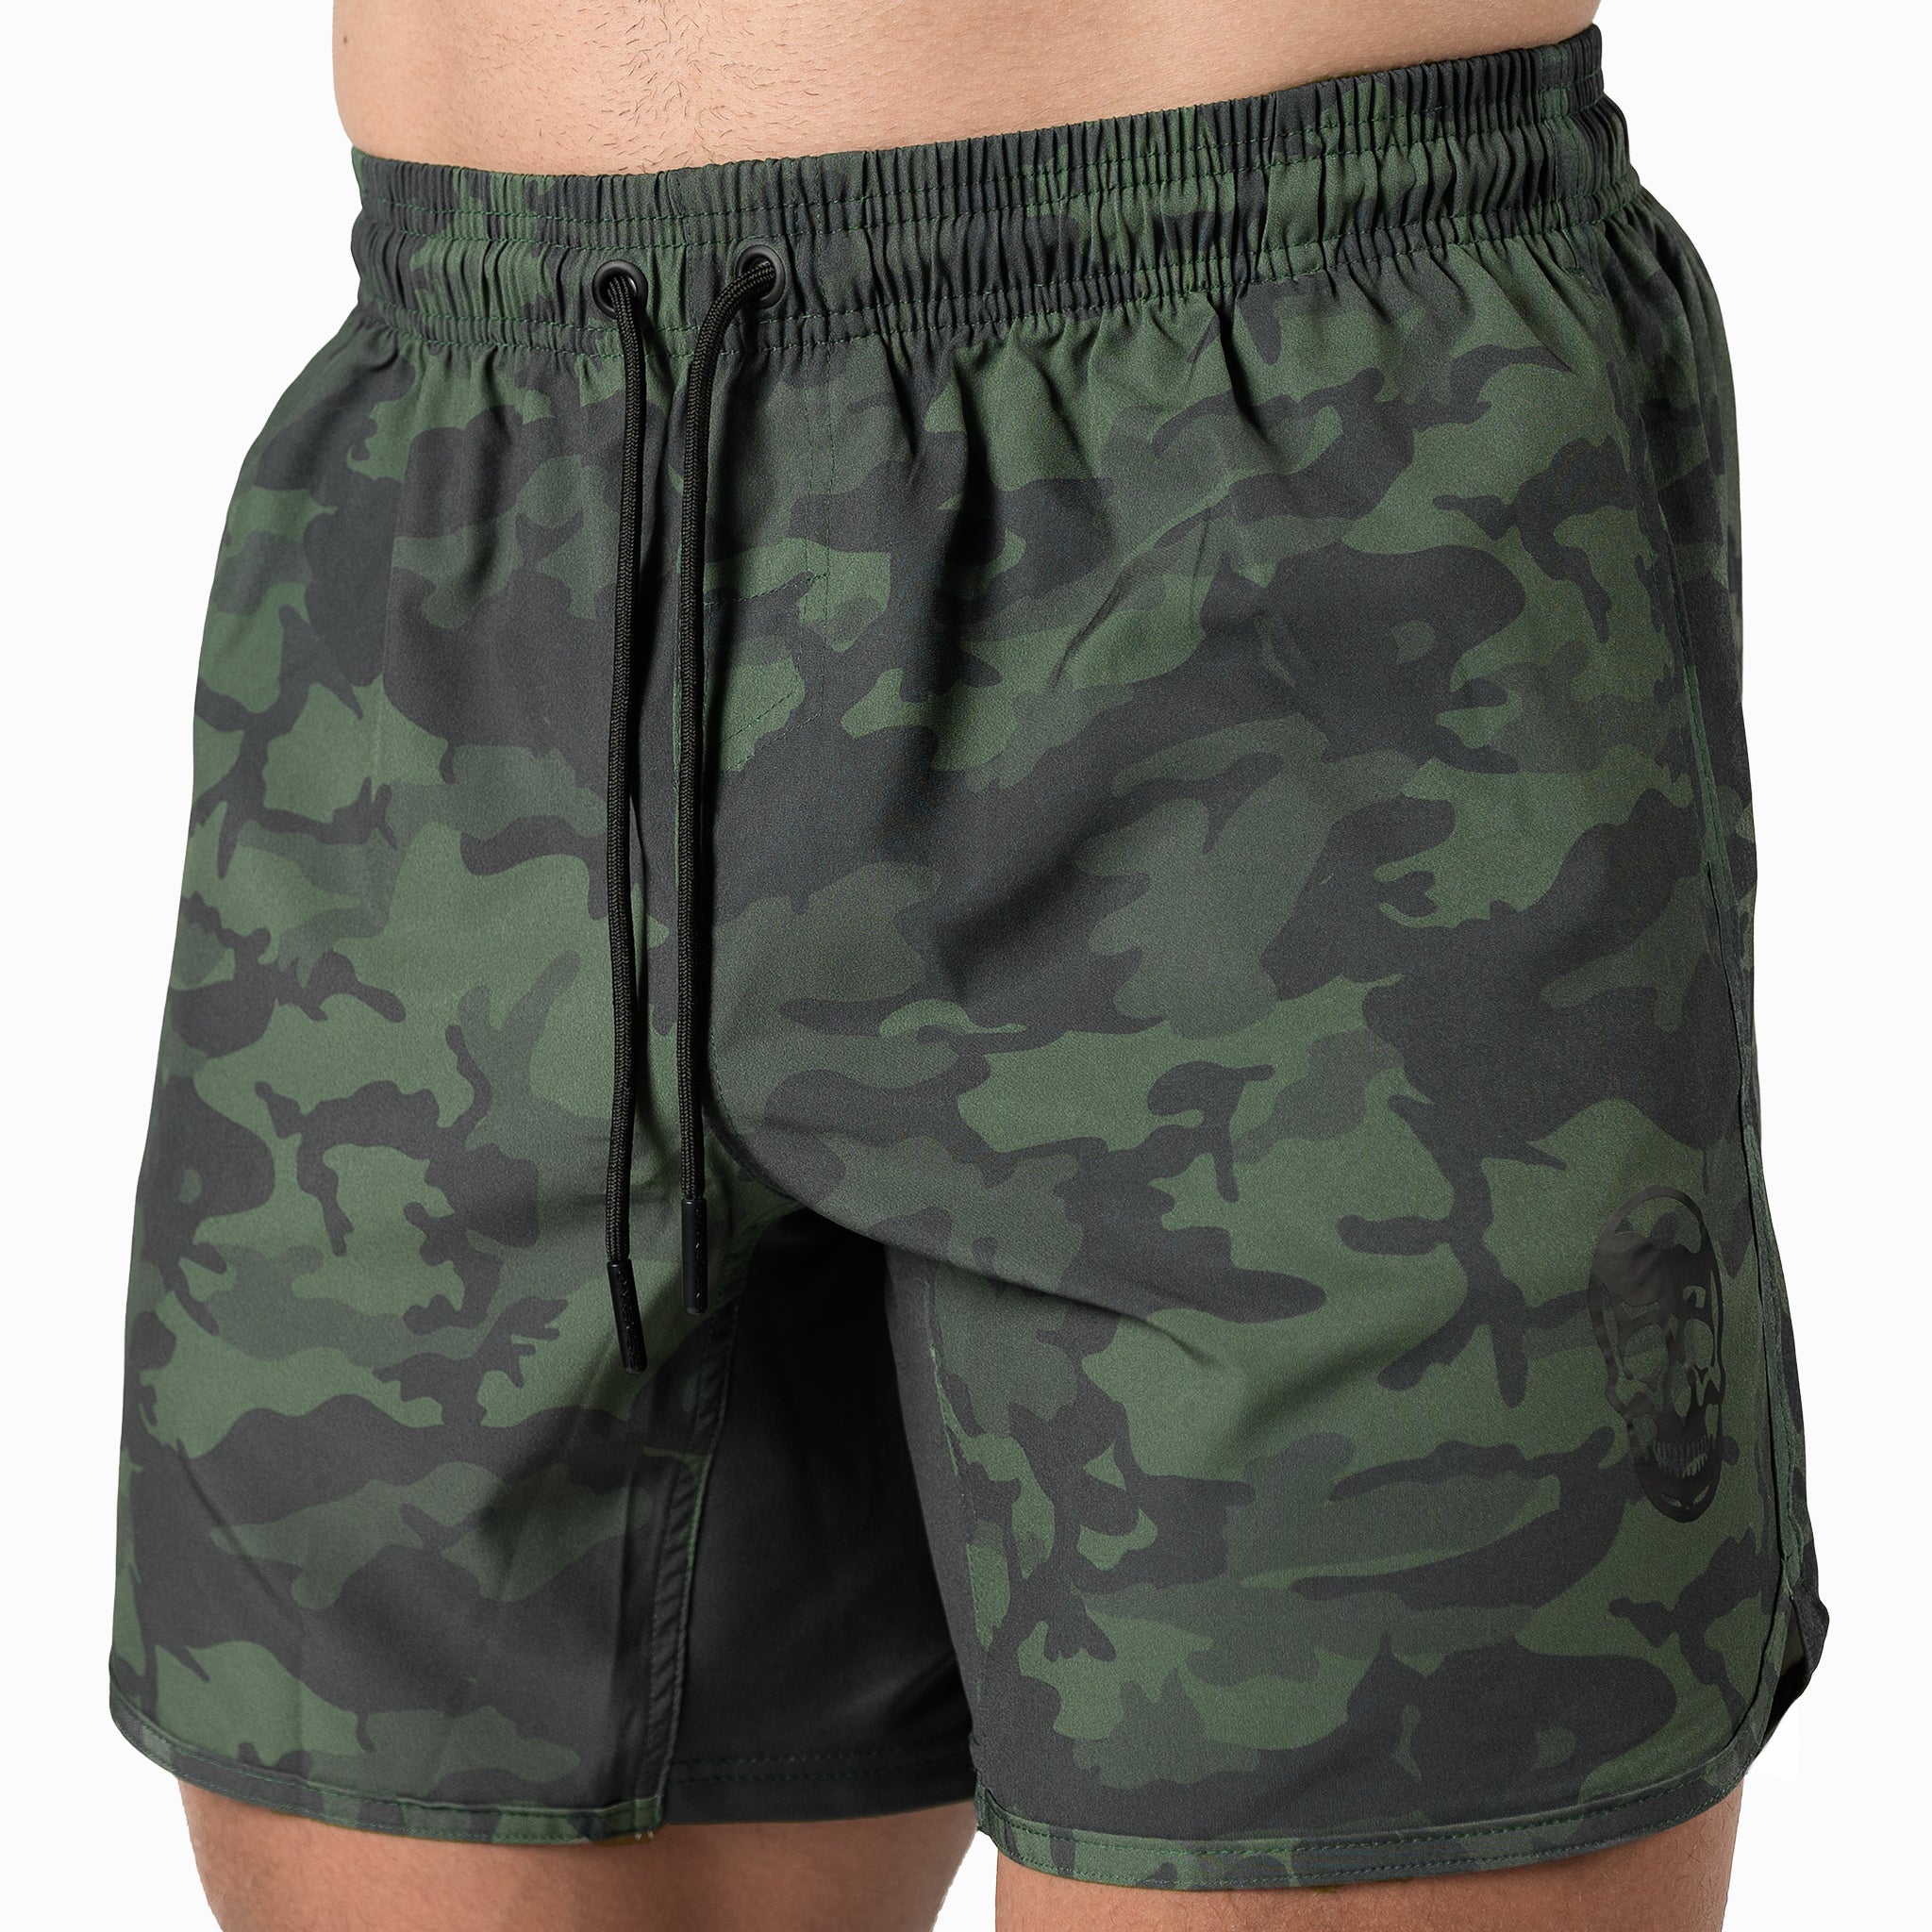 gr training shorts forest camo cropped front